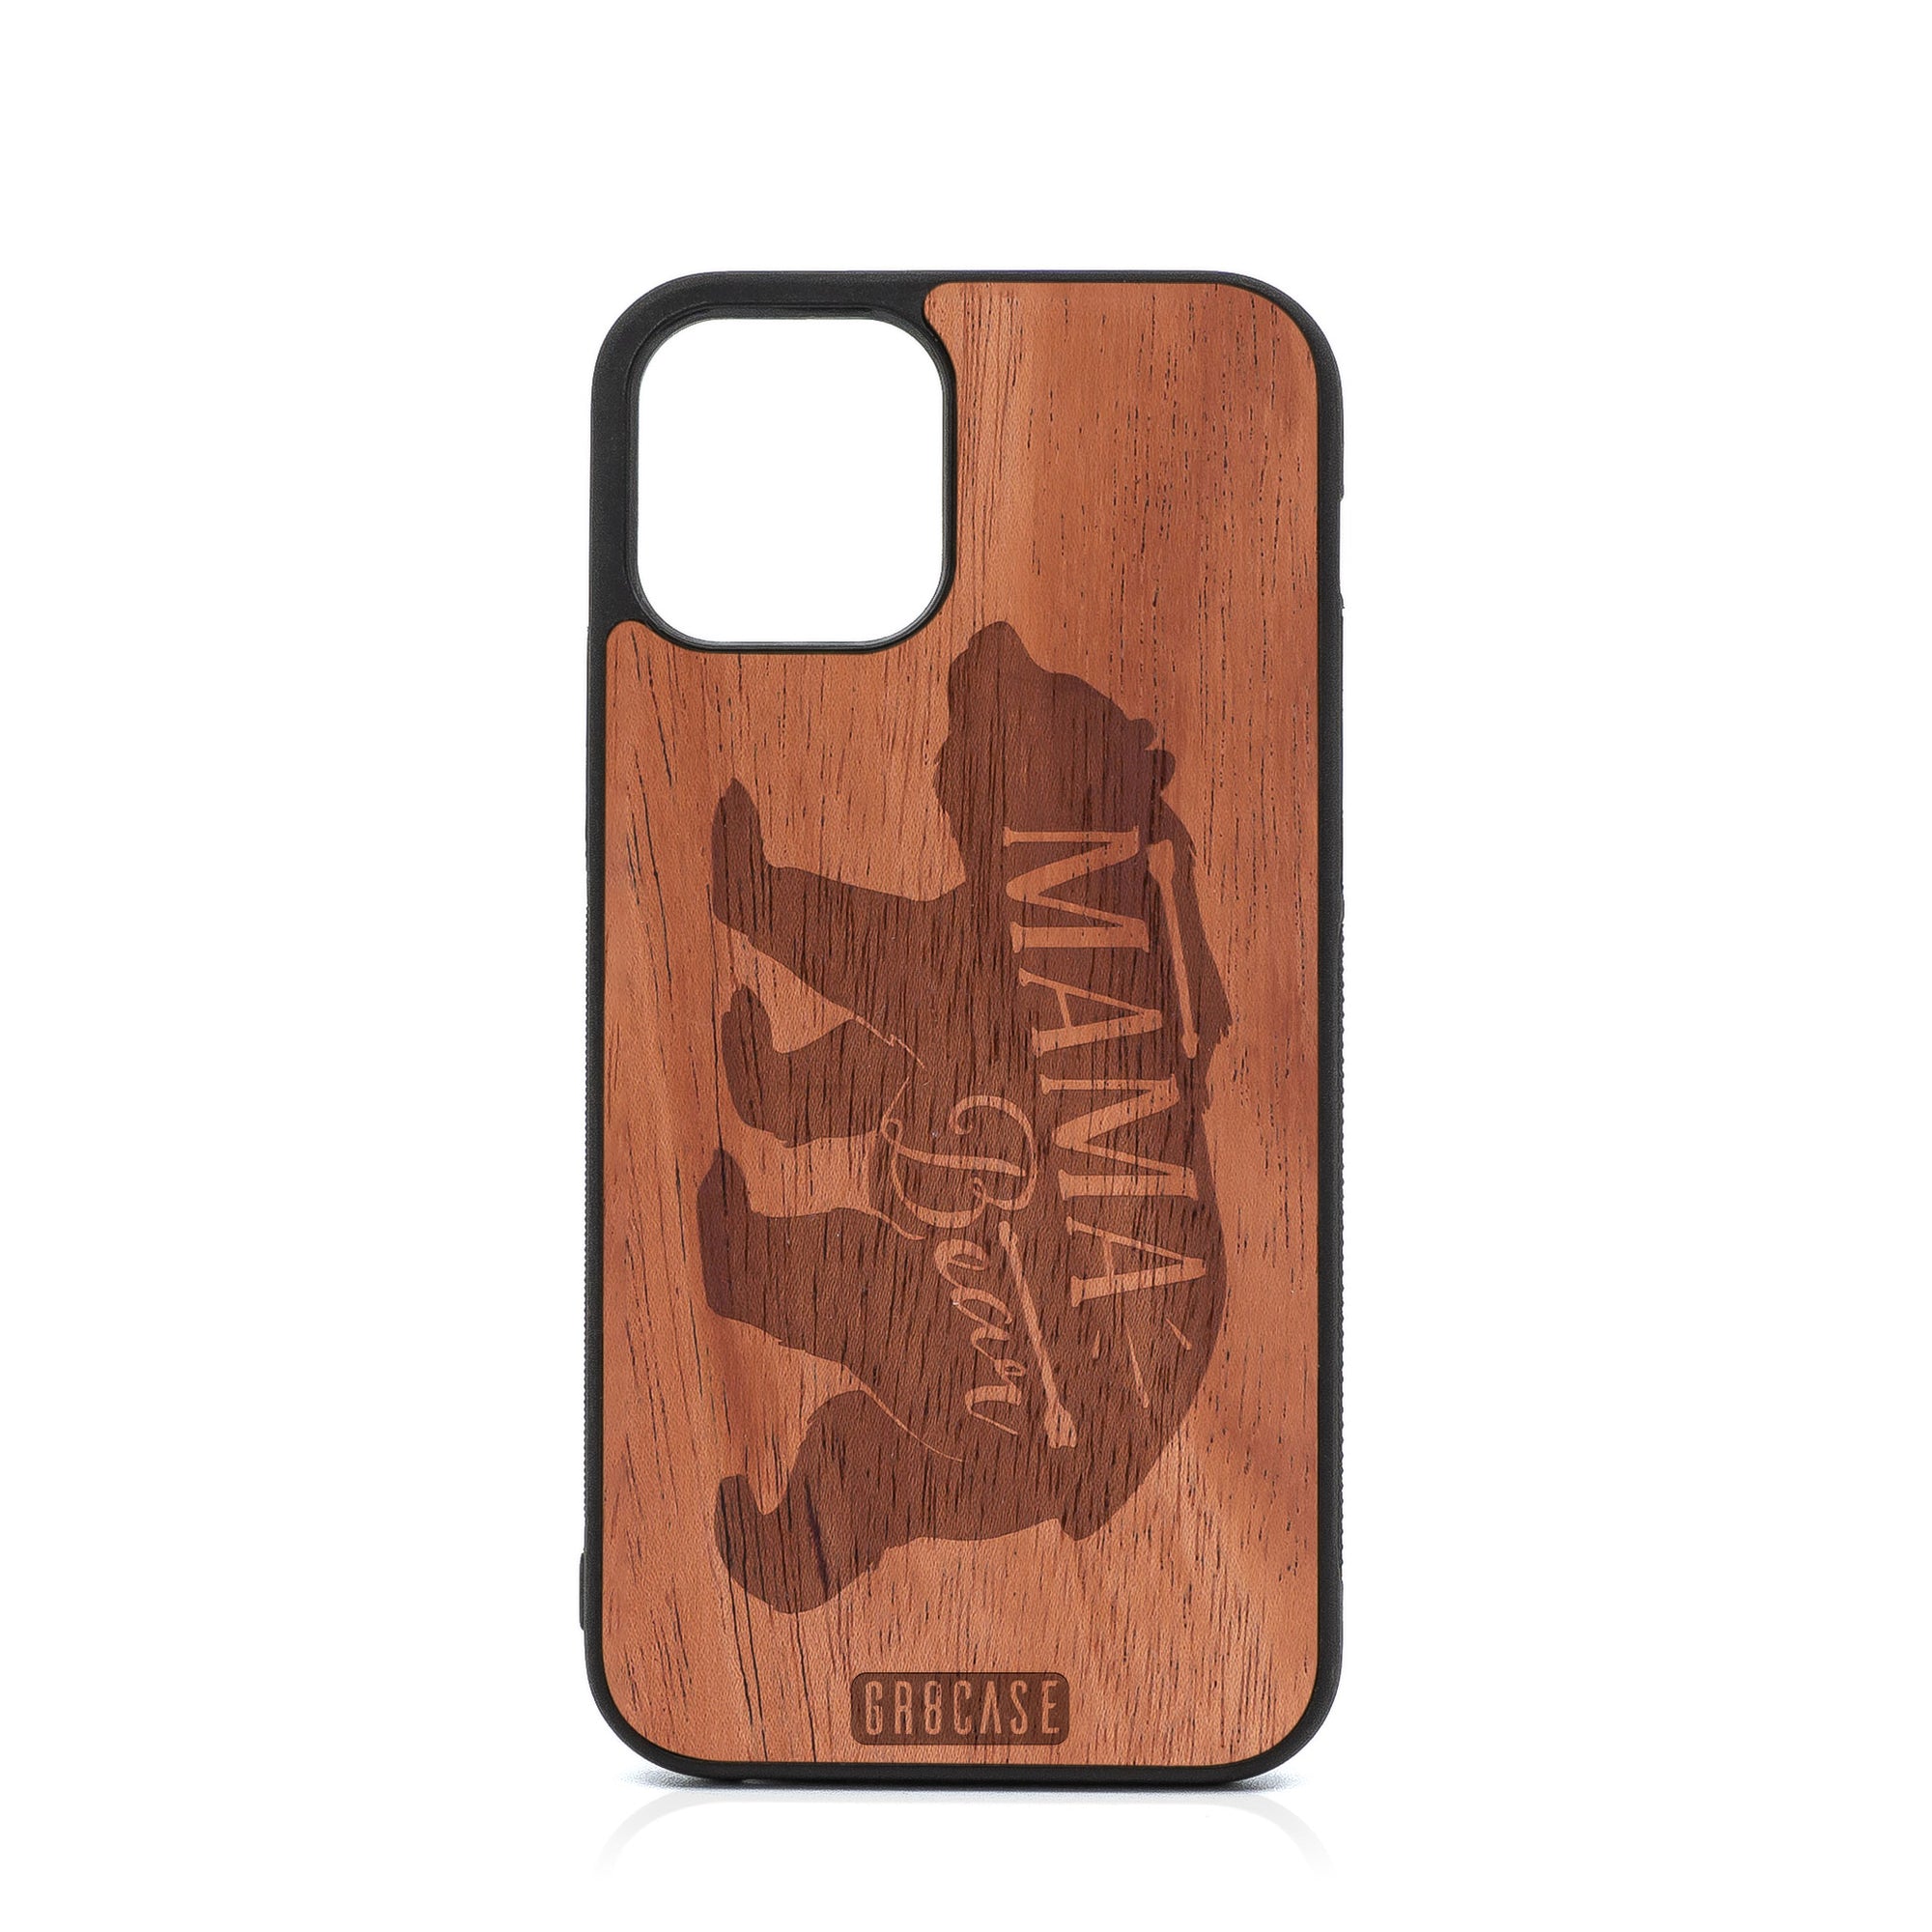 Mama Bear Design Wood Case For iPhone 12 Pro